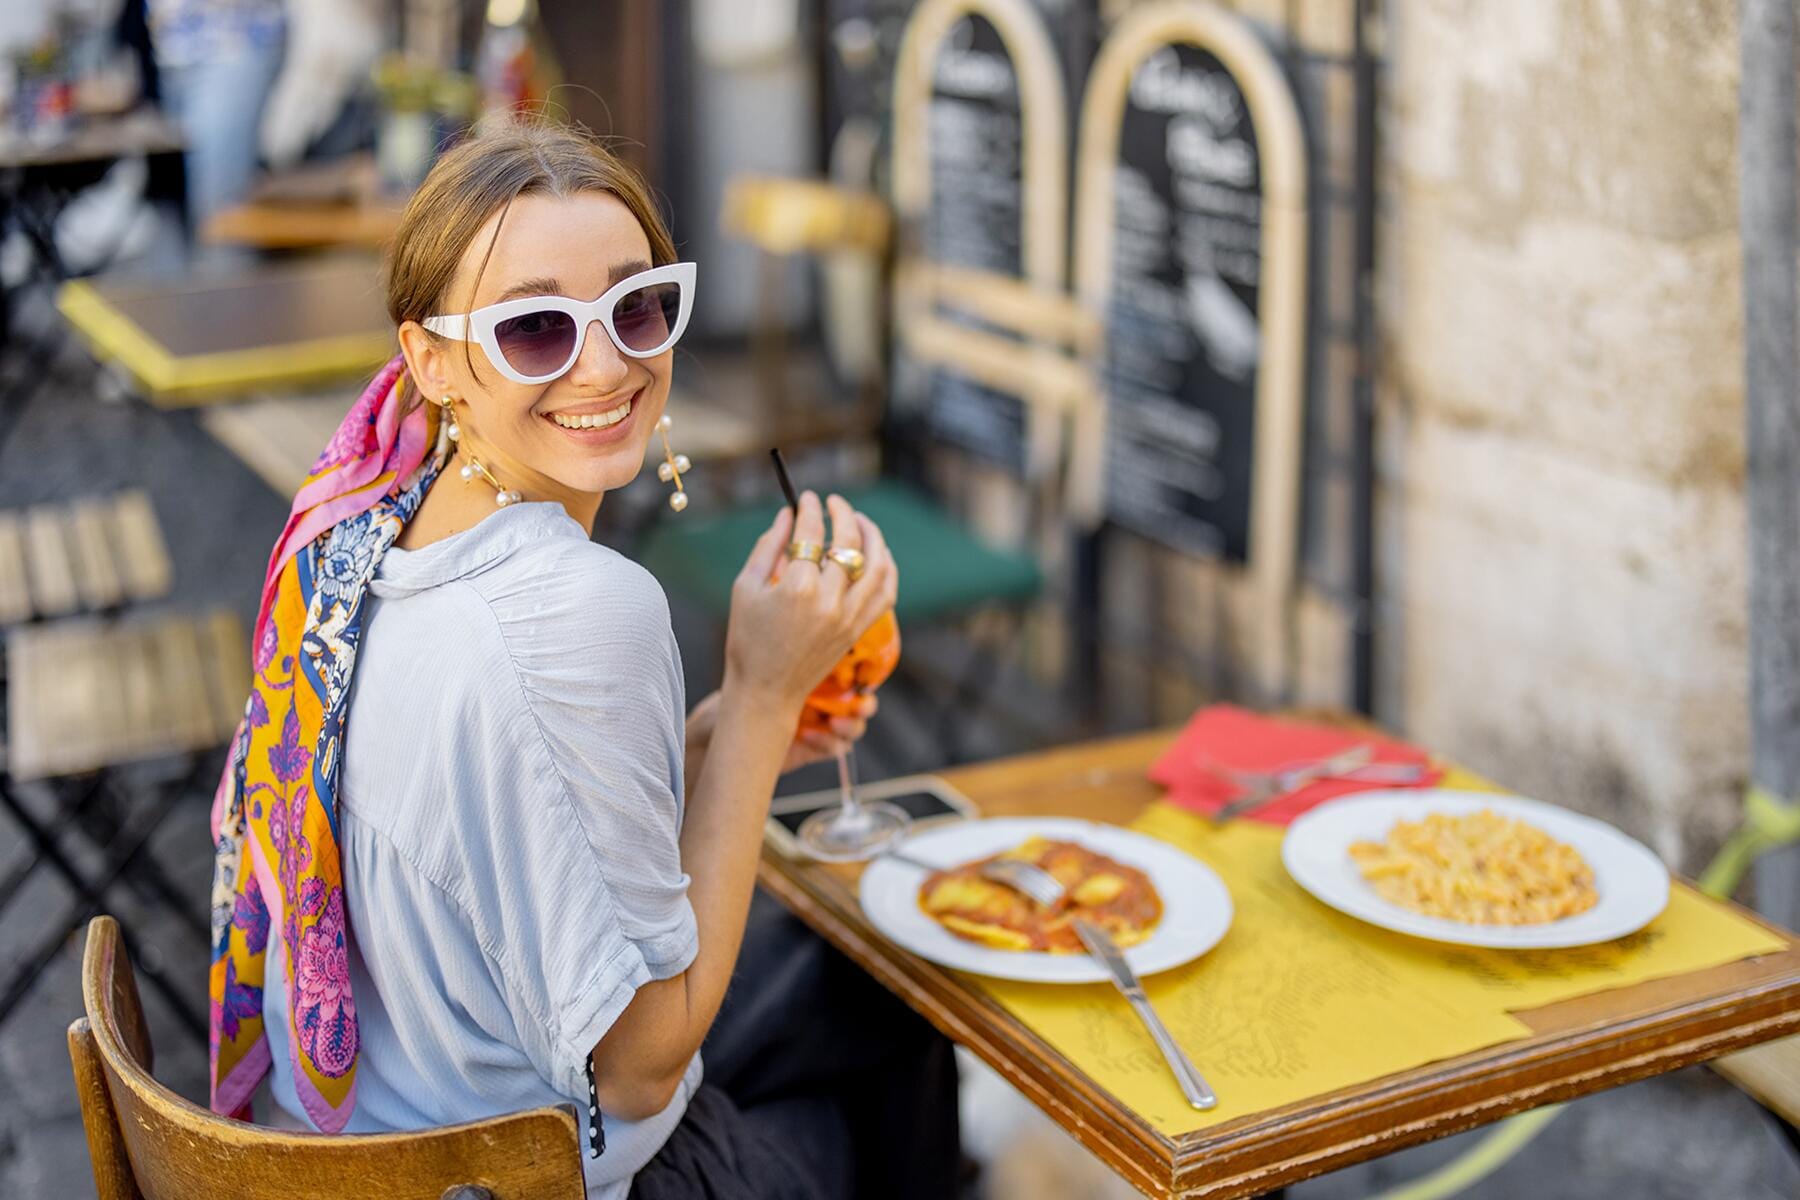 Here's How to Spot a Tourist Trap Restaurant in Italy